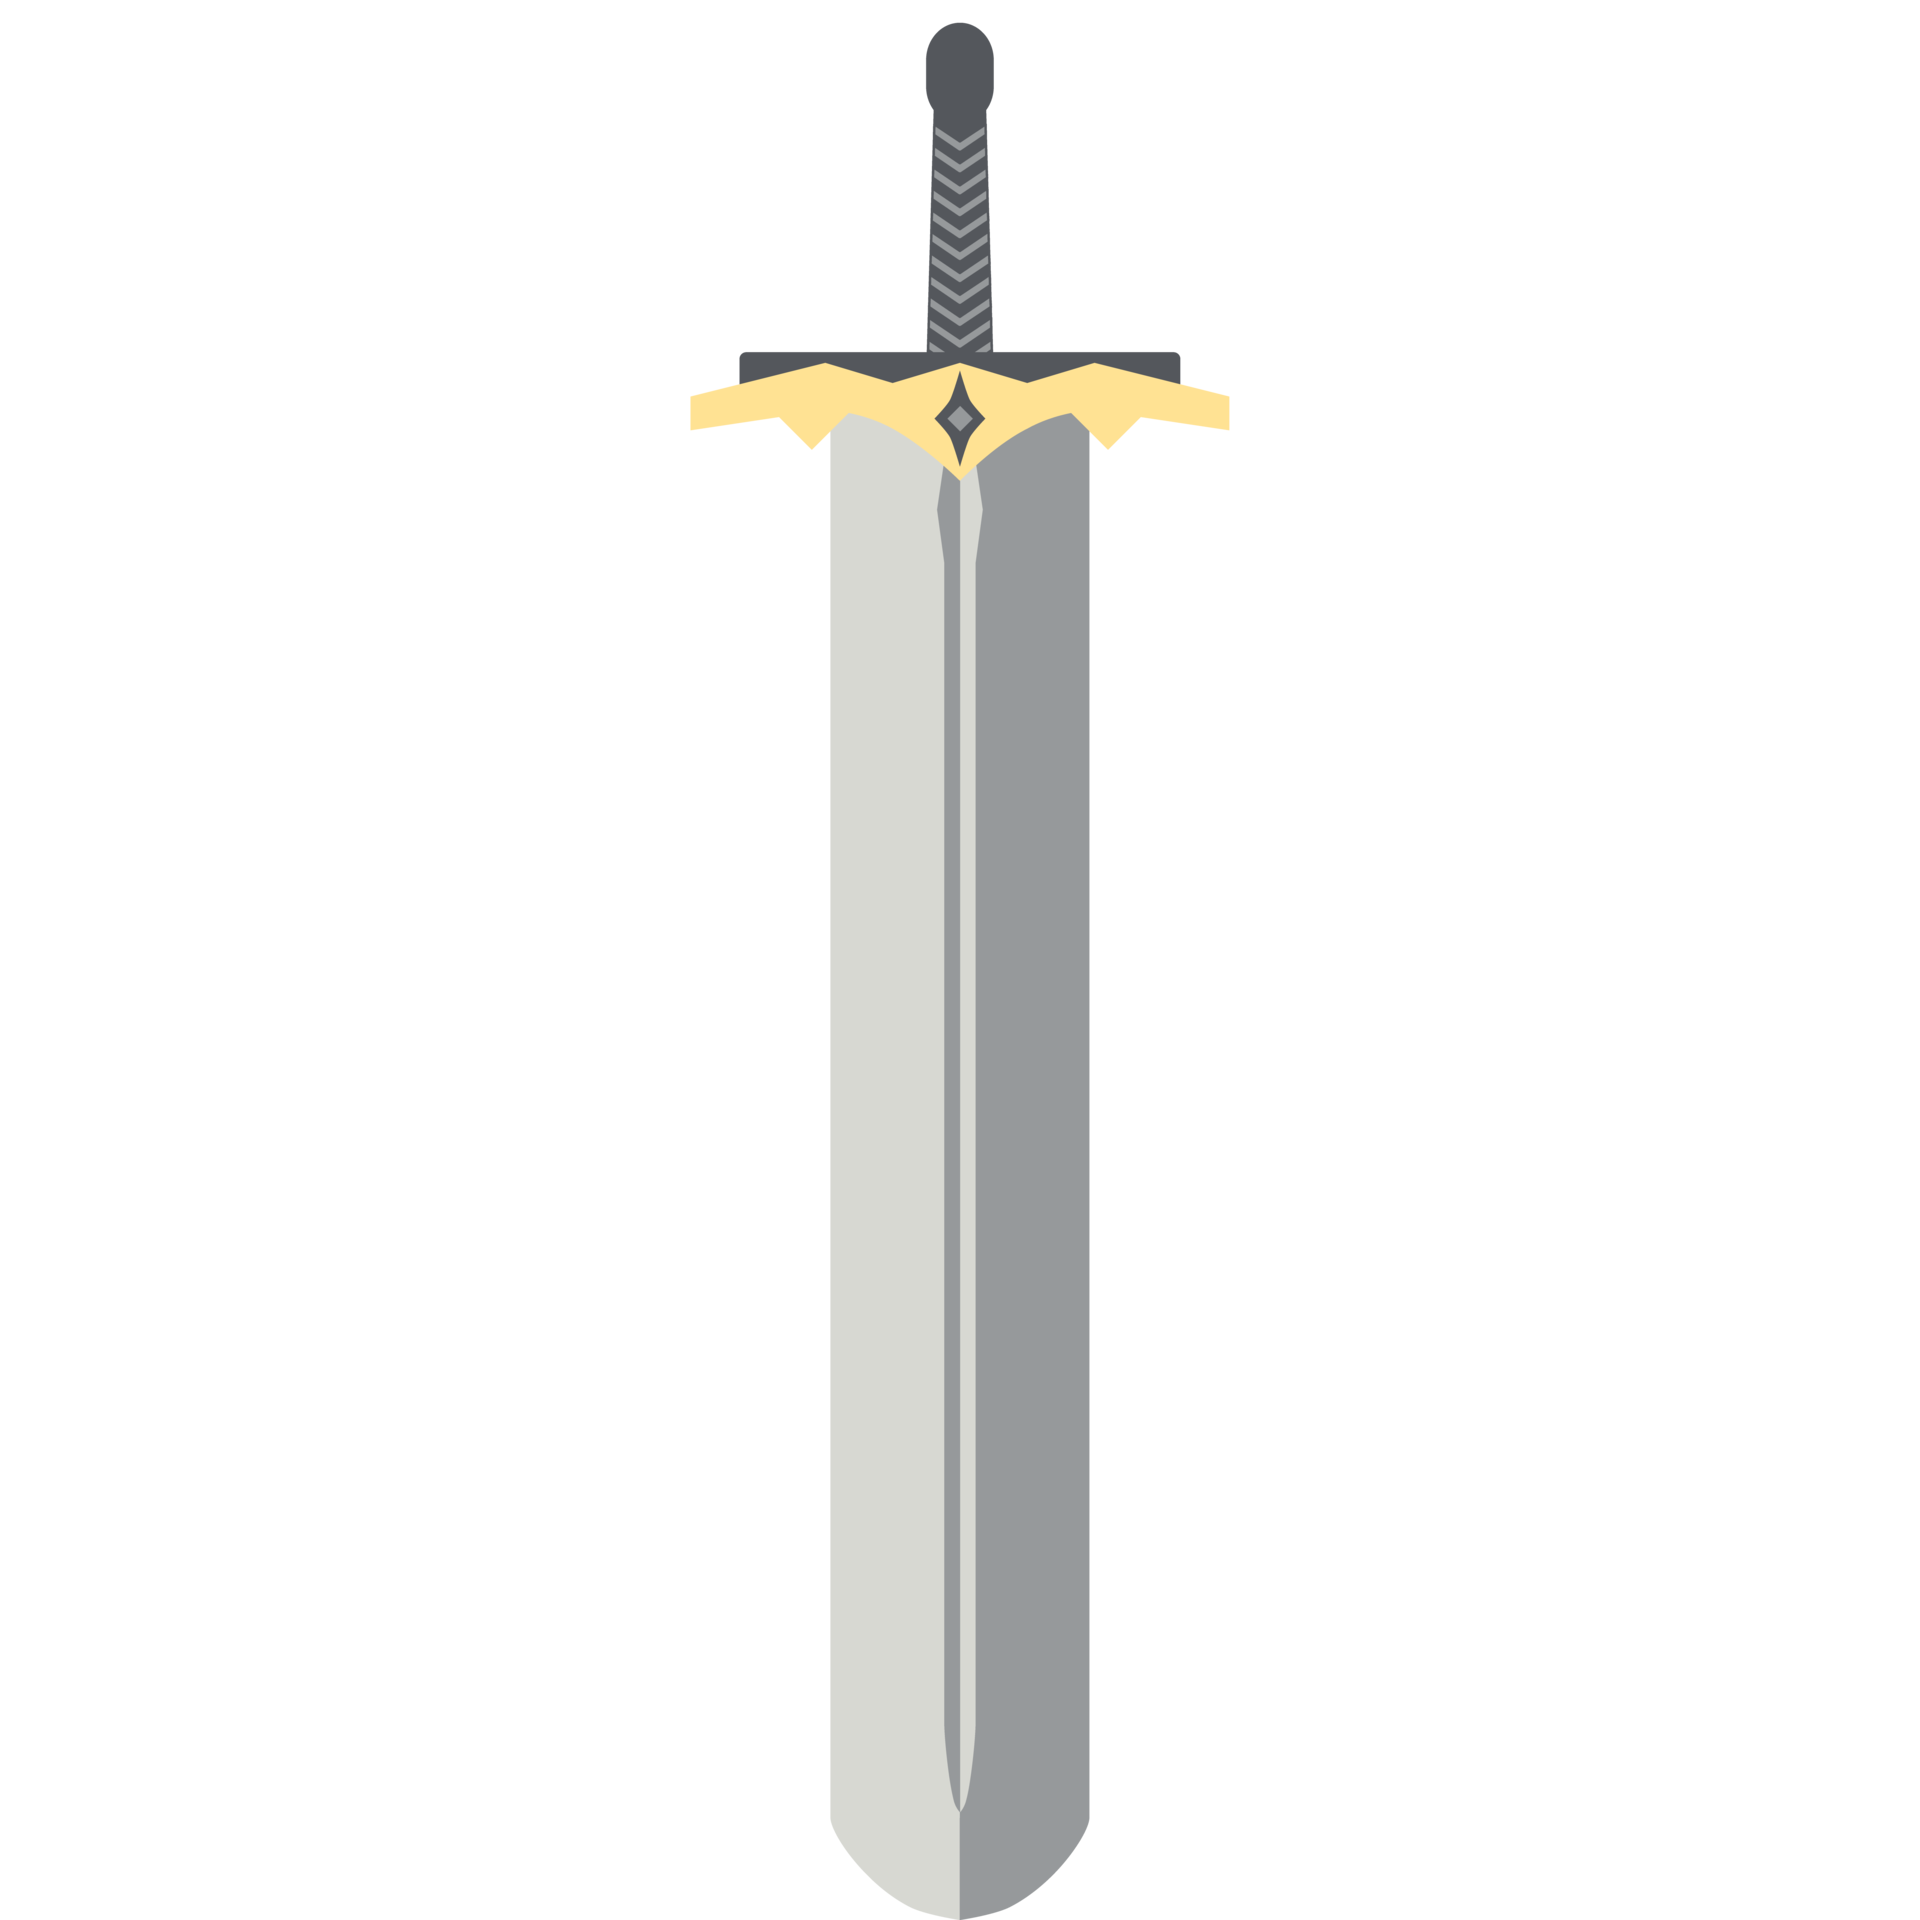 Big Knight Sword Two Handed Two Side Sharp Big Swords Warrior Weapon  15440037 PNG